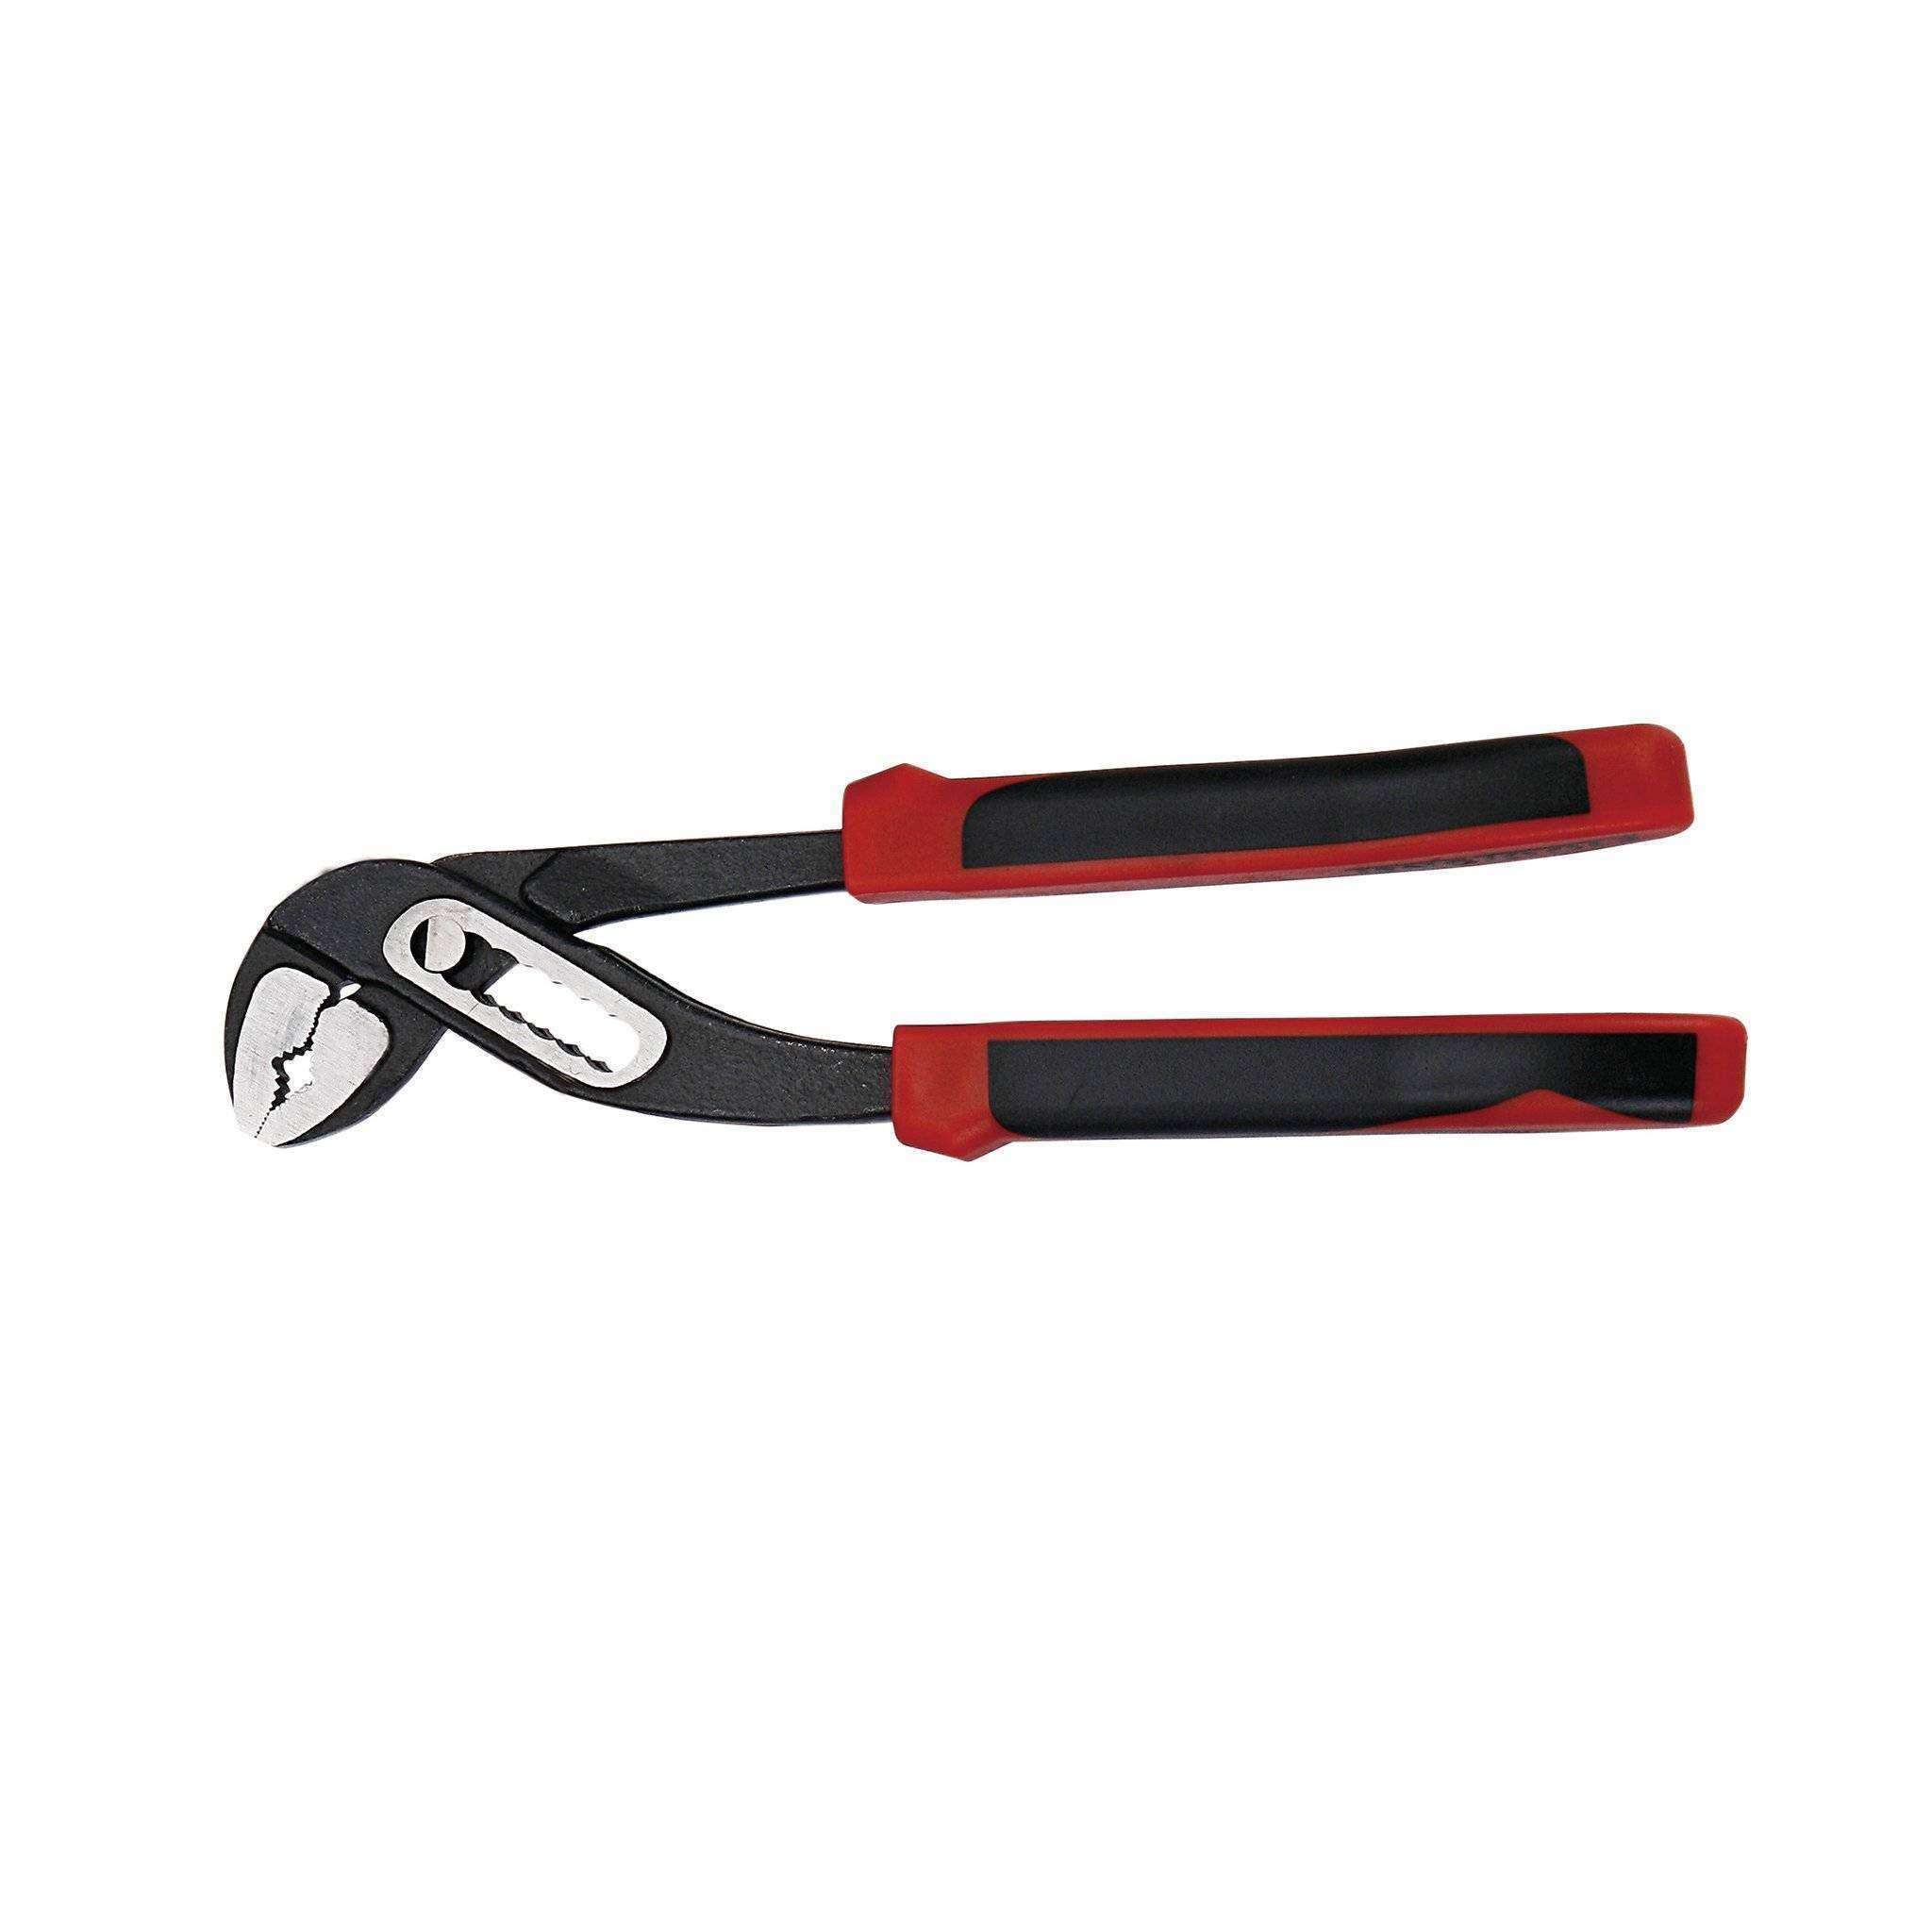 Teng Tools - 6 inch Higher Leverage End Nippers - MB448-6